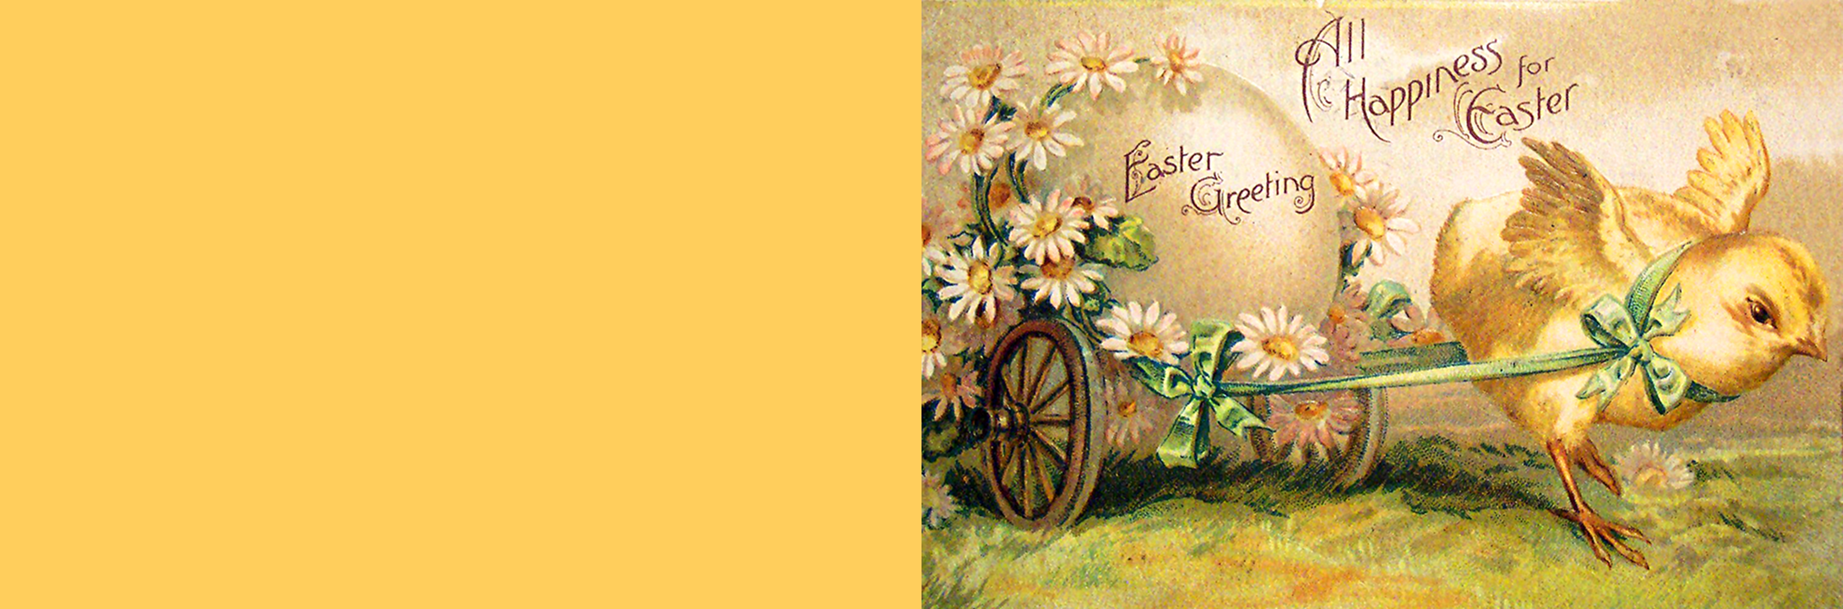 Old vintage Easter greeting card with yellow chicken pulling a cart with a large egg.